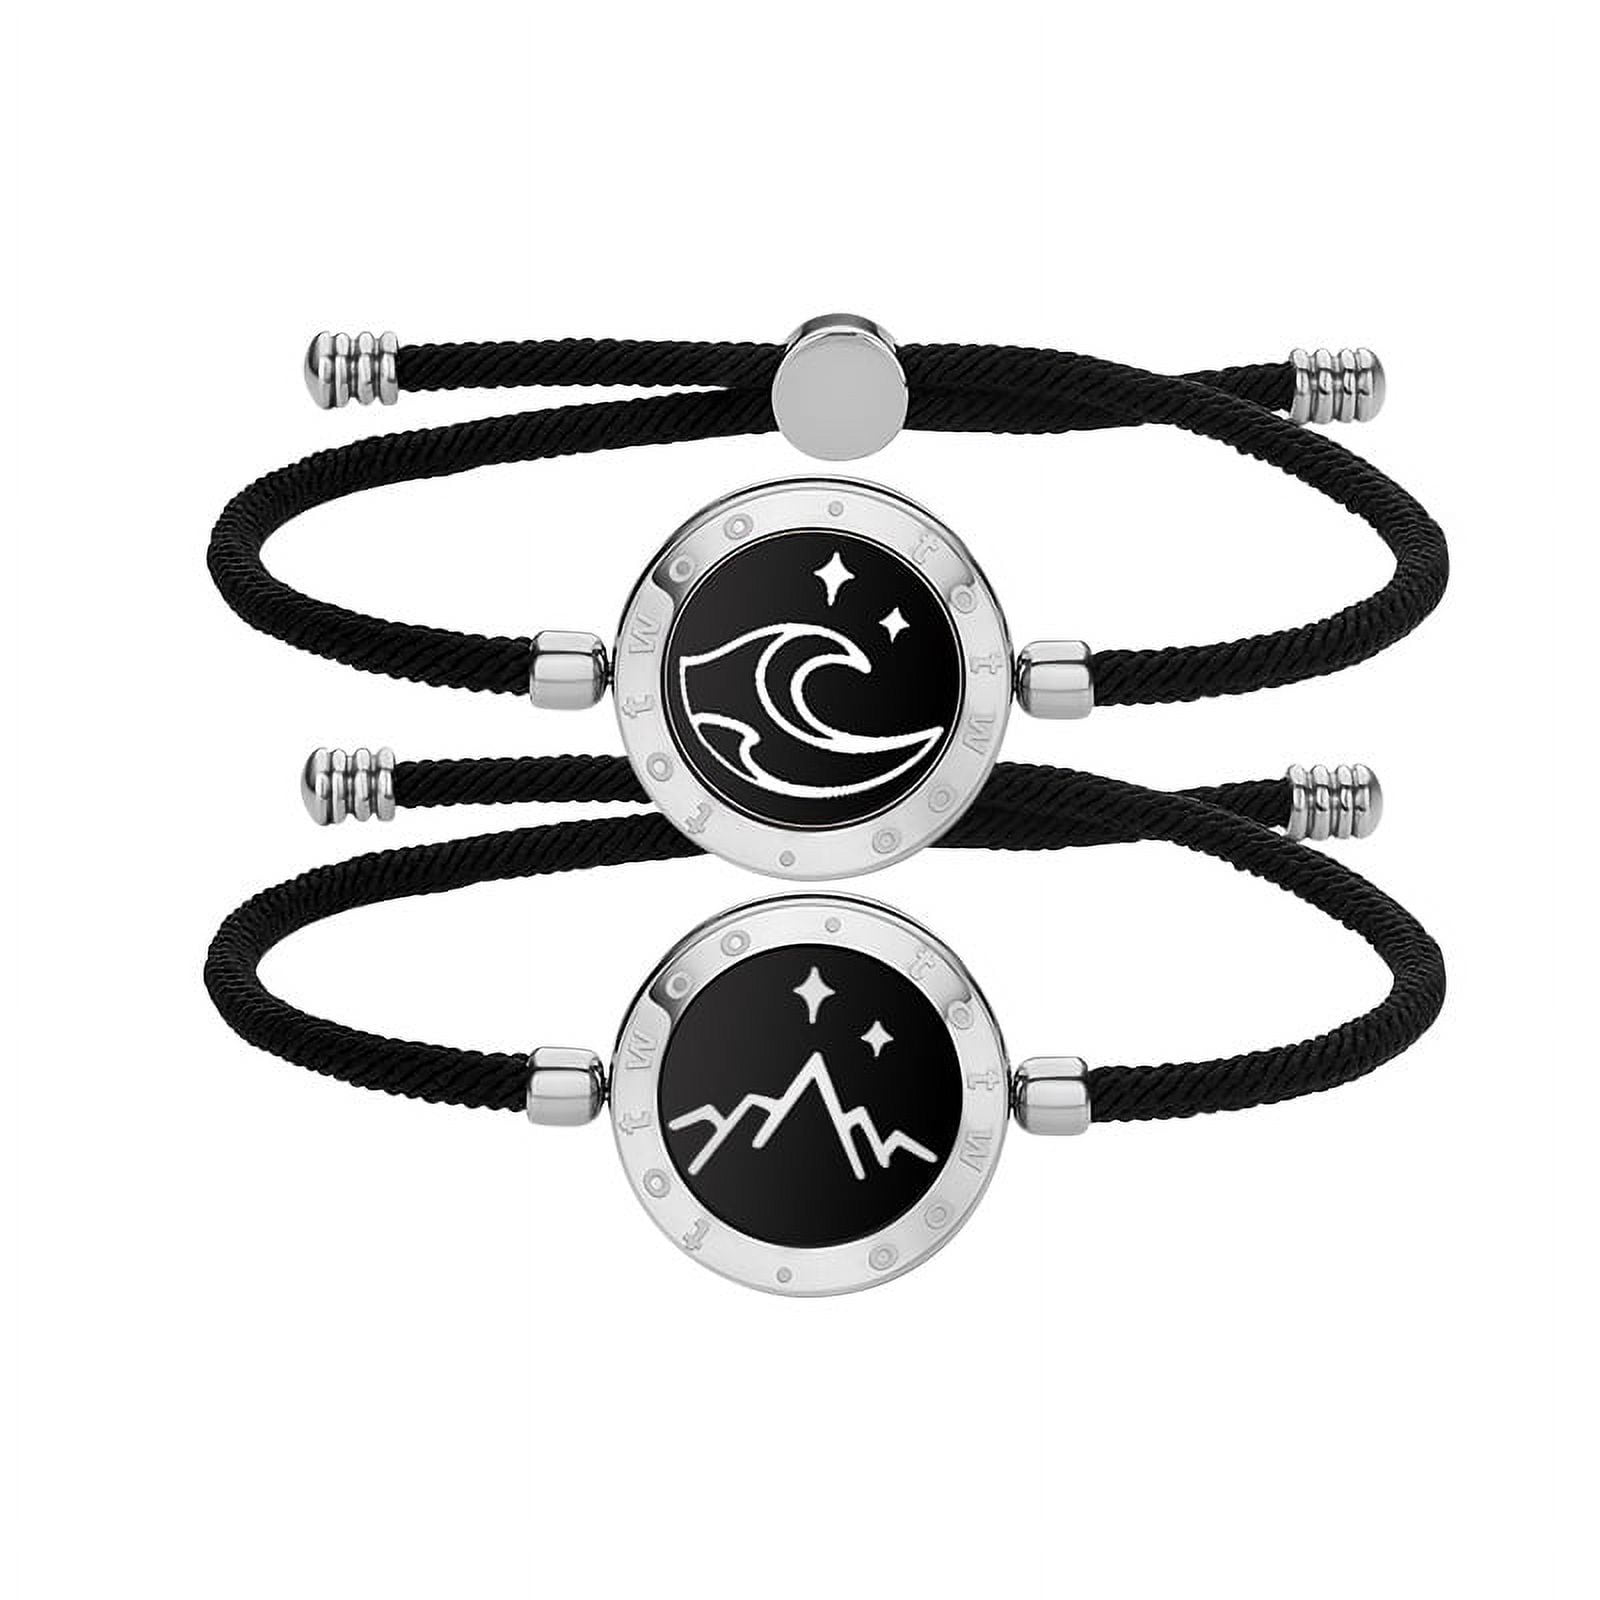 Totwoo Long Distance Touch Bracelets for Couples Relationship